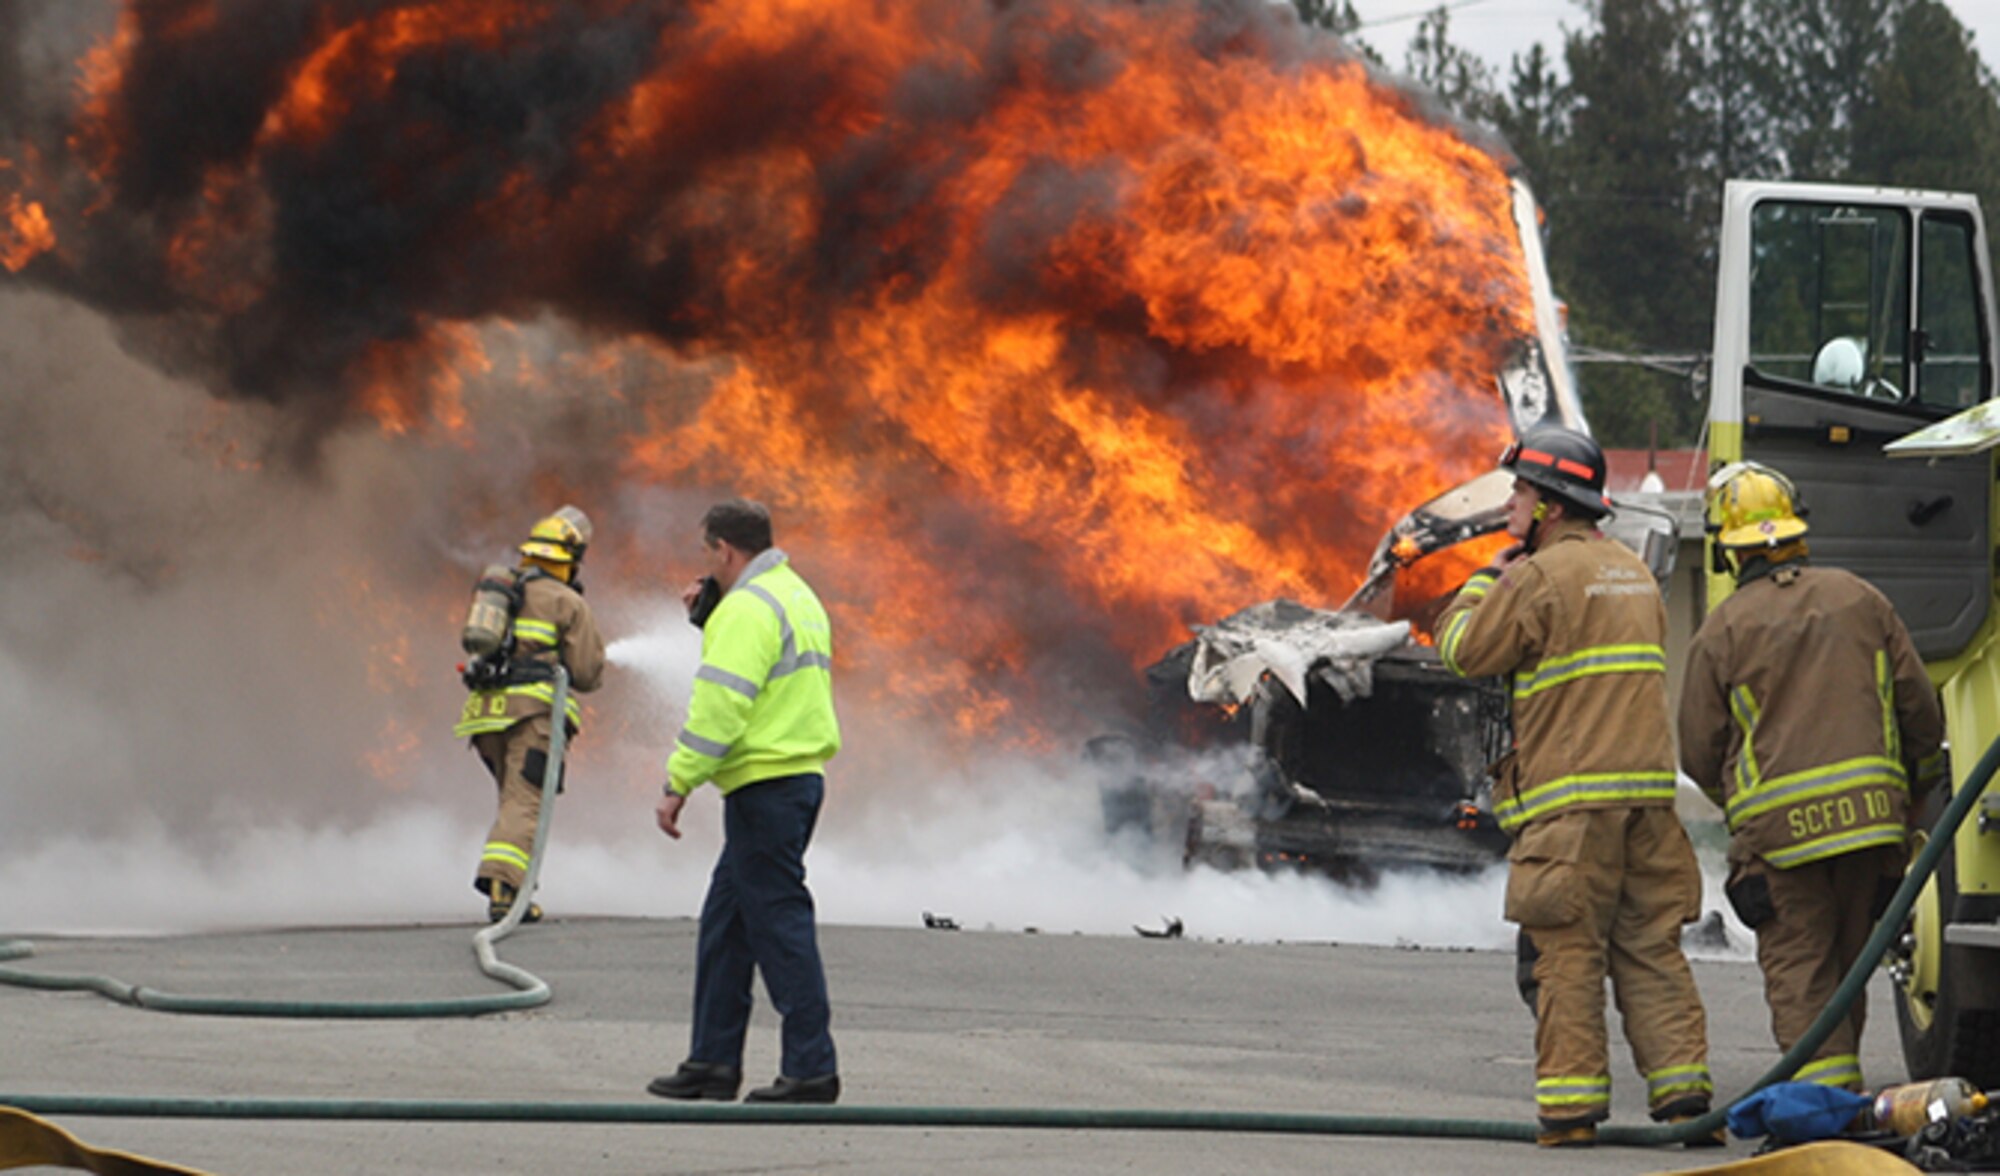 Volunteer firefighters with the Spokane County Fire District 10 participate in an exercise during a West Plains Academy course December 14, 2014. The West Plains Academy is a 12-week long program which arms new firefighters with the basic skills needed to be effective while not posing a risk to themselves or others. (Courtesy Photo)